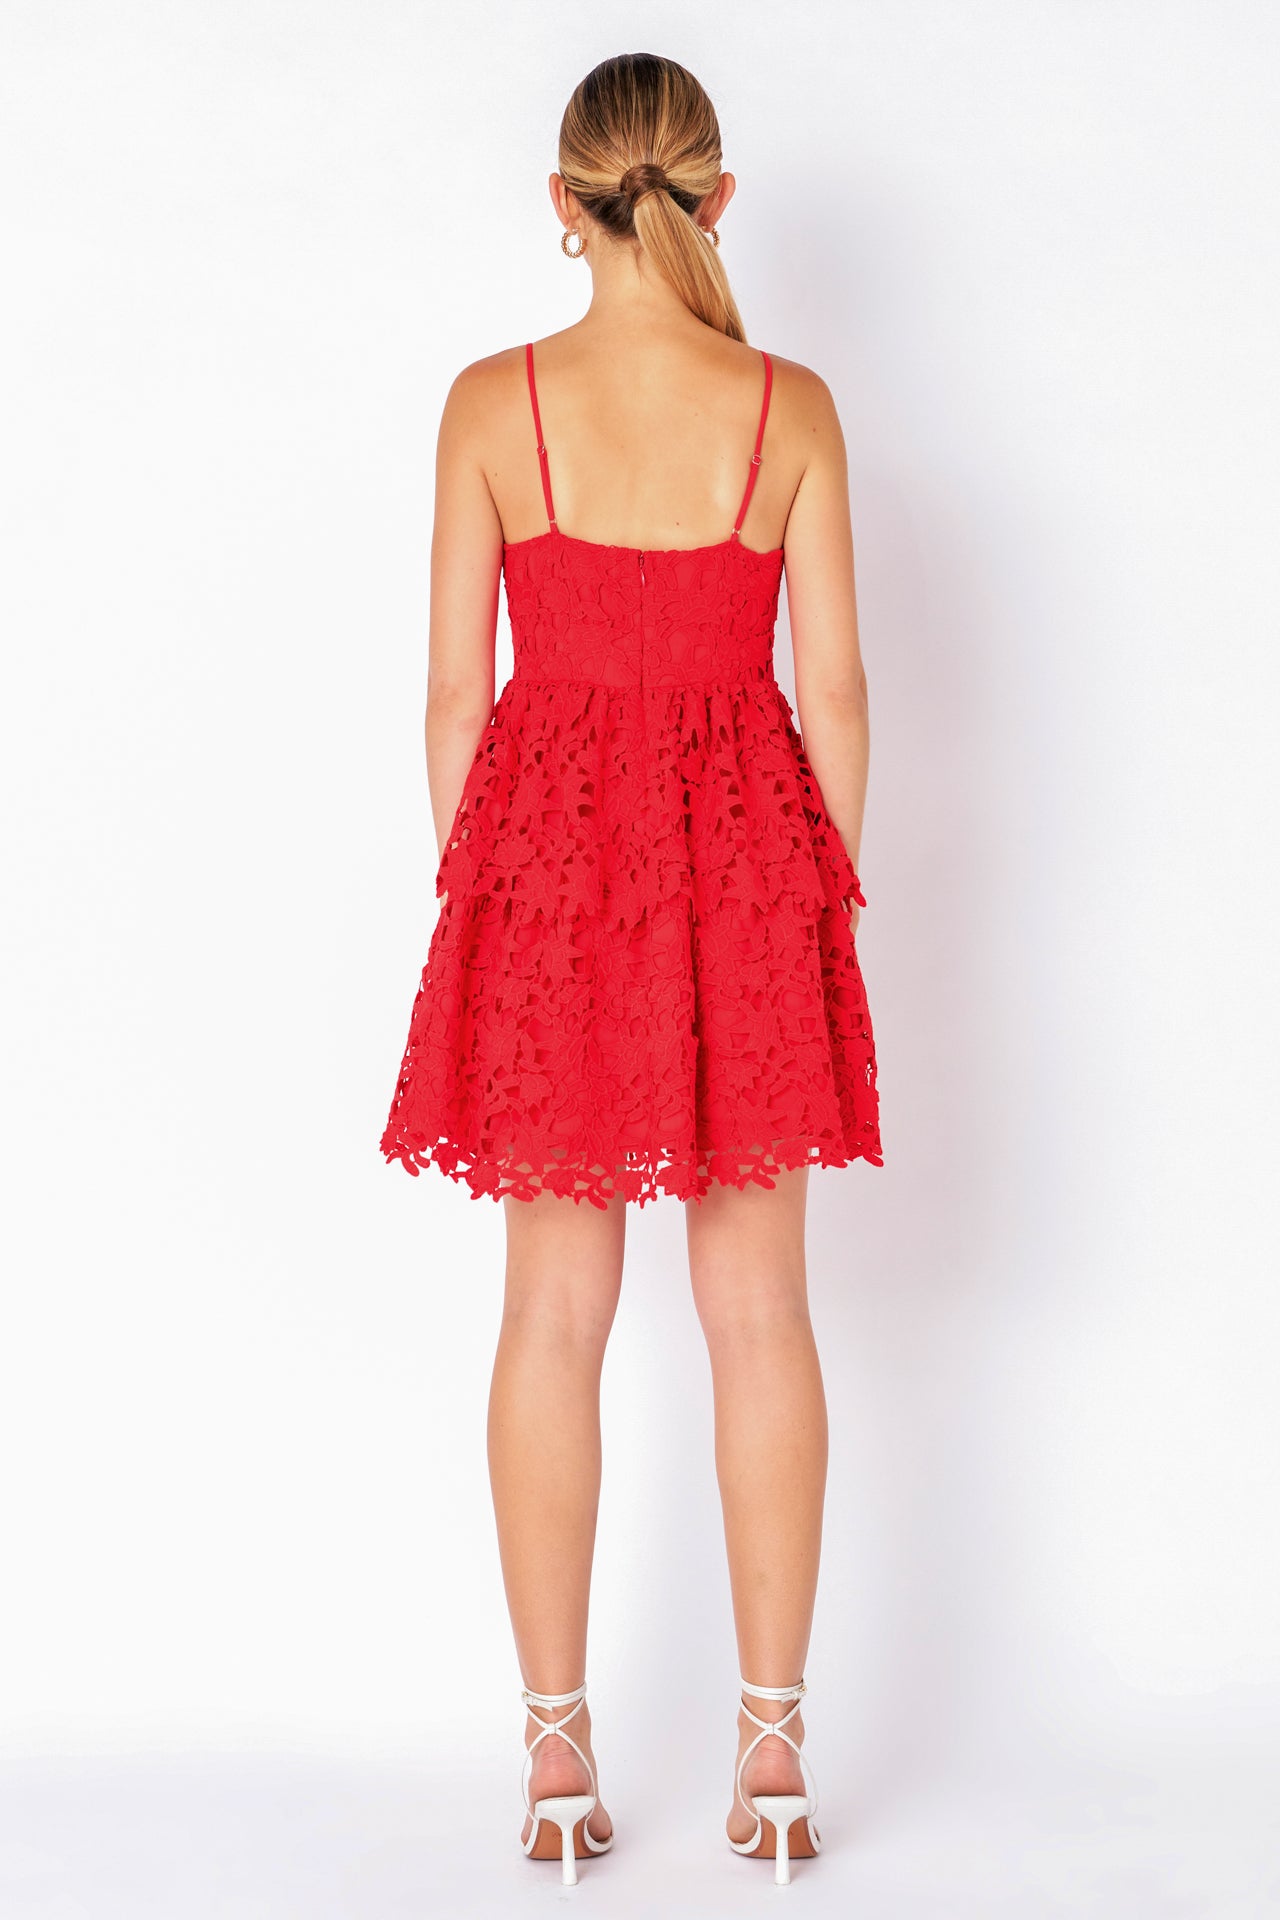 ENDLESS ROSE - Layered Skirt Crochet Mini Dress - DRESSES available at Objectrare